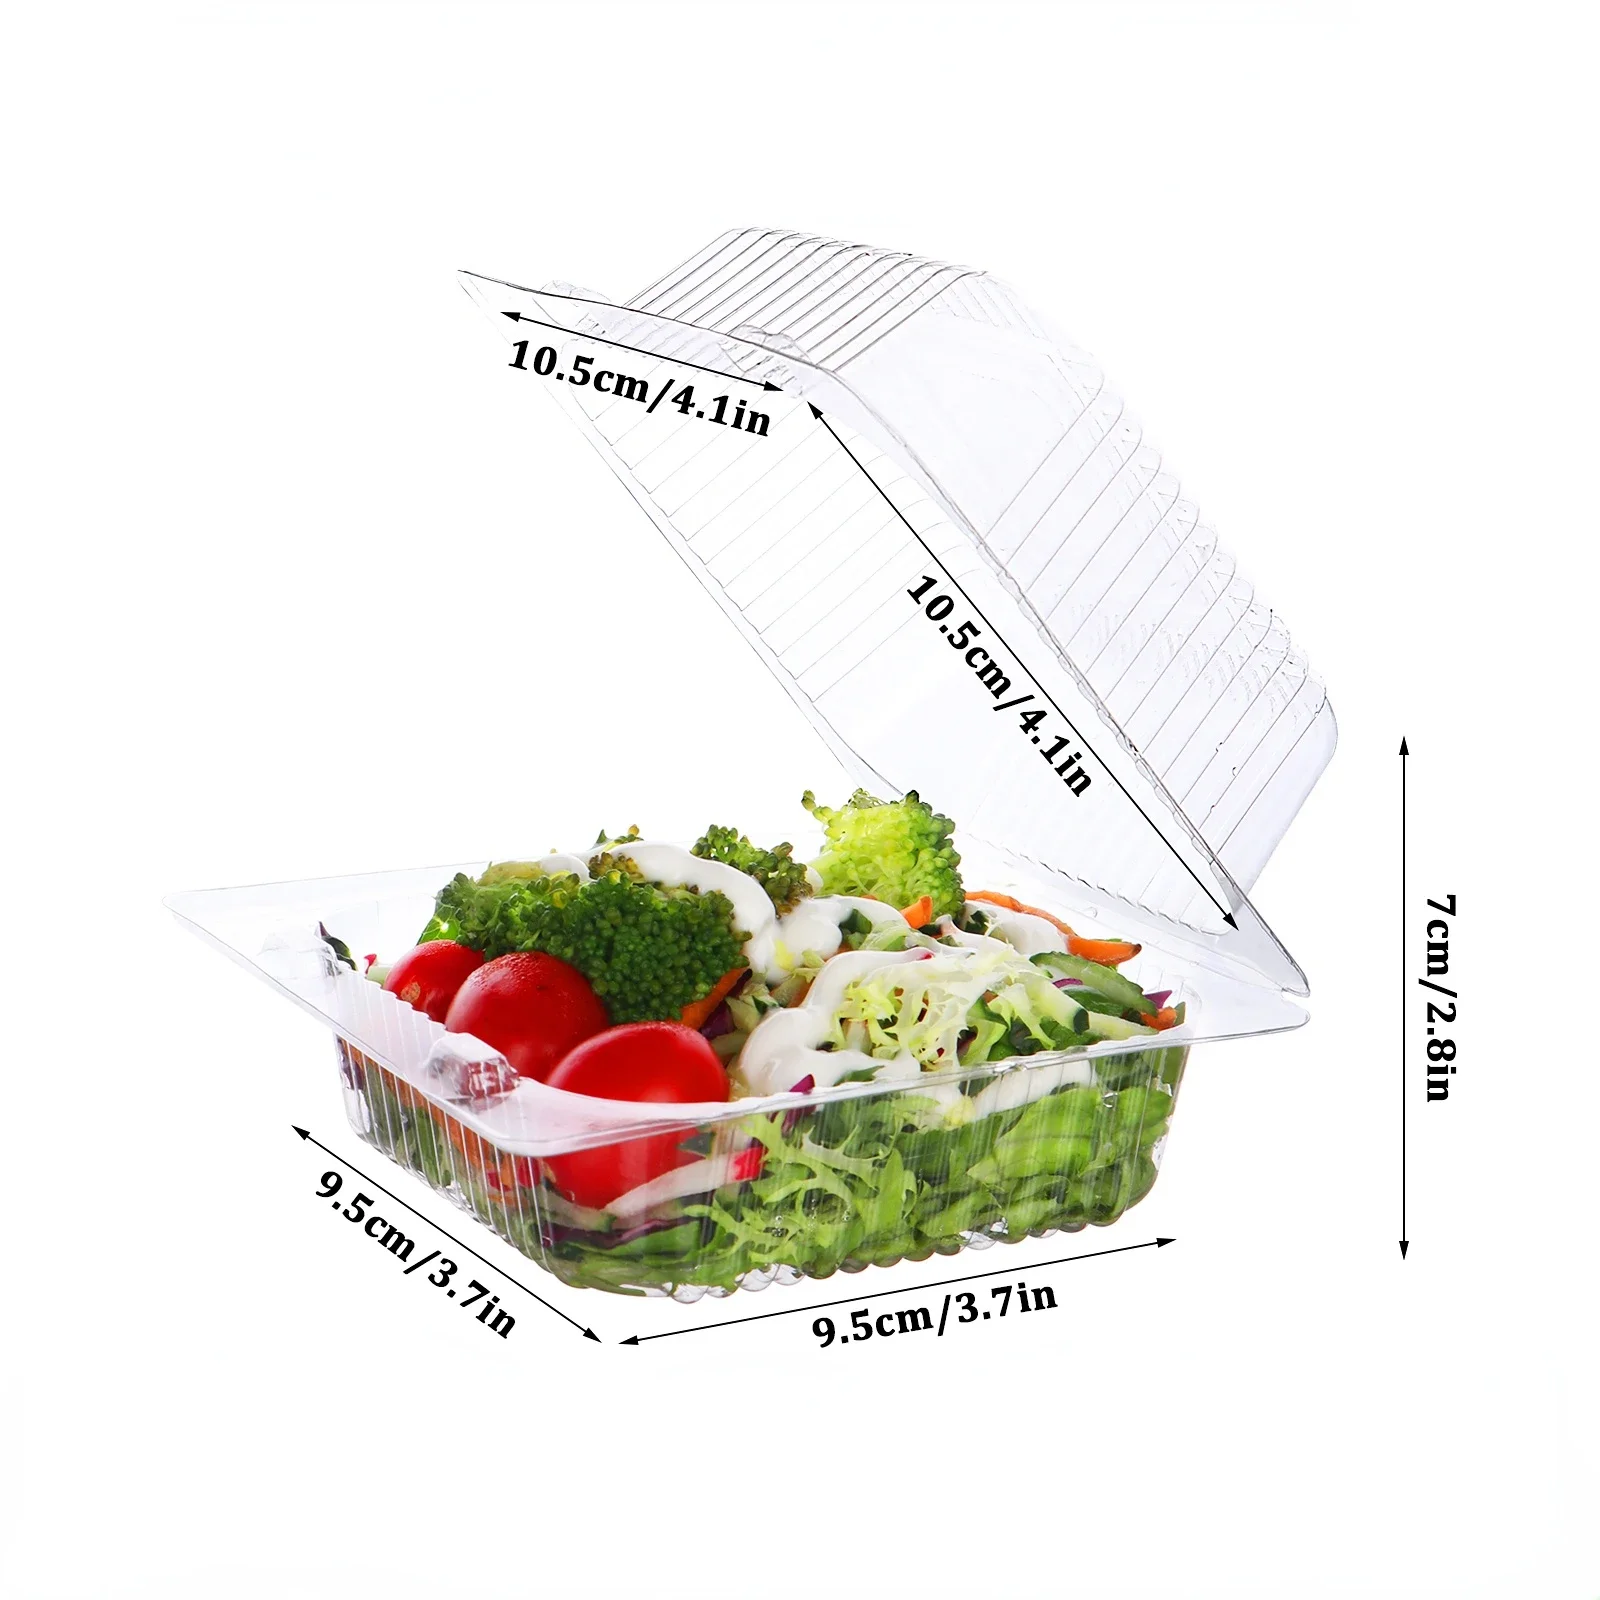 https://ae01.alicdn.com/kf/S53e336ca3184471687915d5065fd7e2bu/25-Pcs-Clear-Clamshell-Food-Container-With-Lids-Party-Disposable-Lunch-Boxes-Picnic-Food-Packing-Boxes.jpg